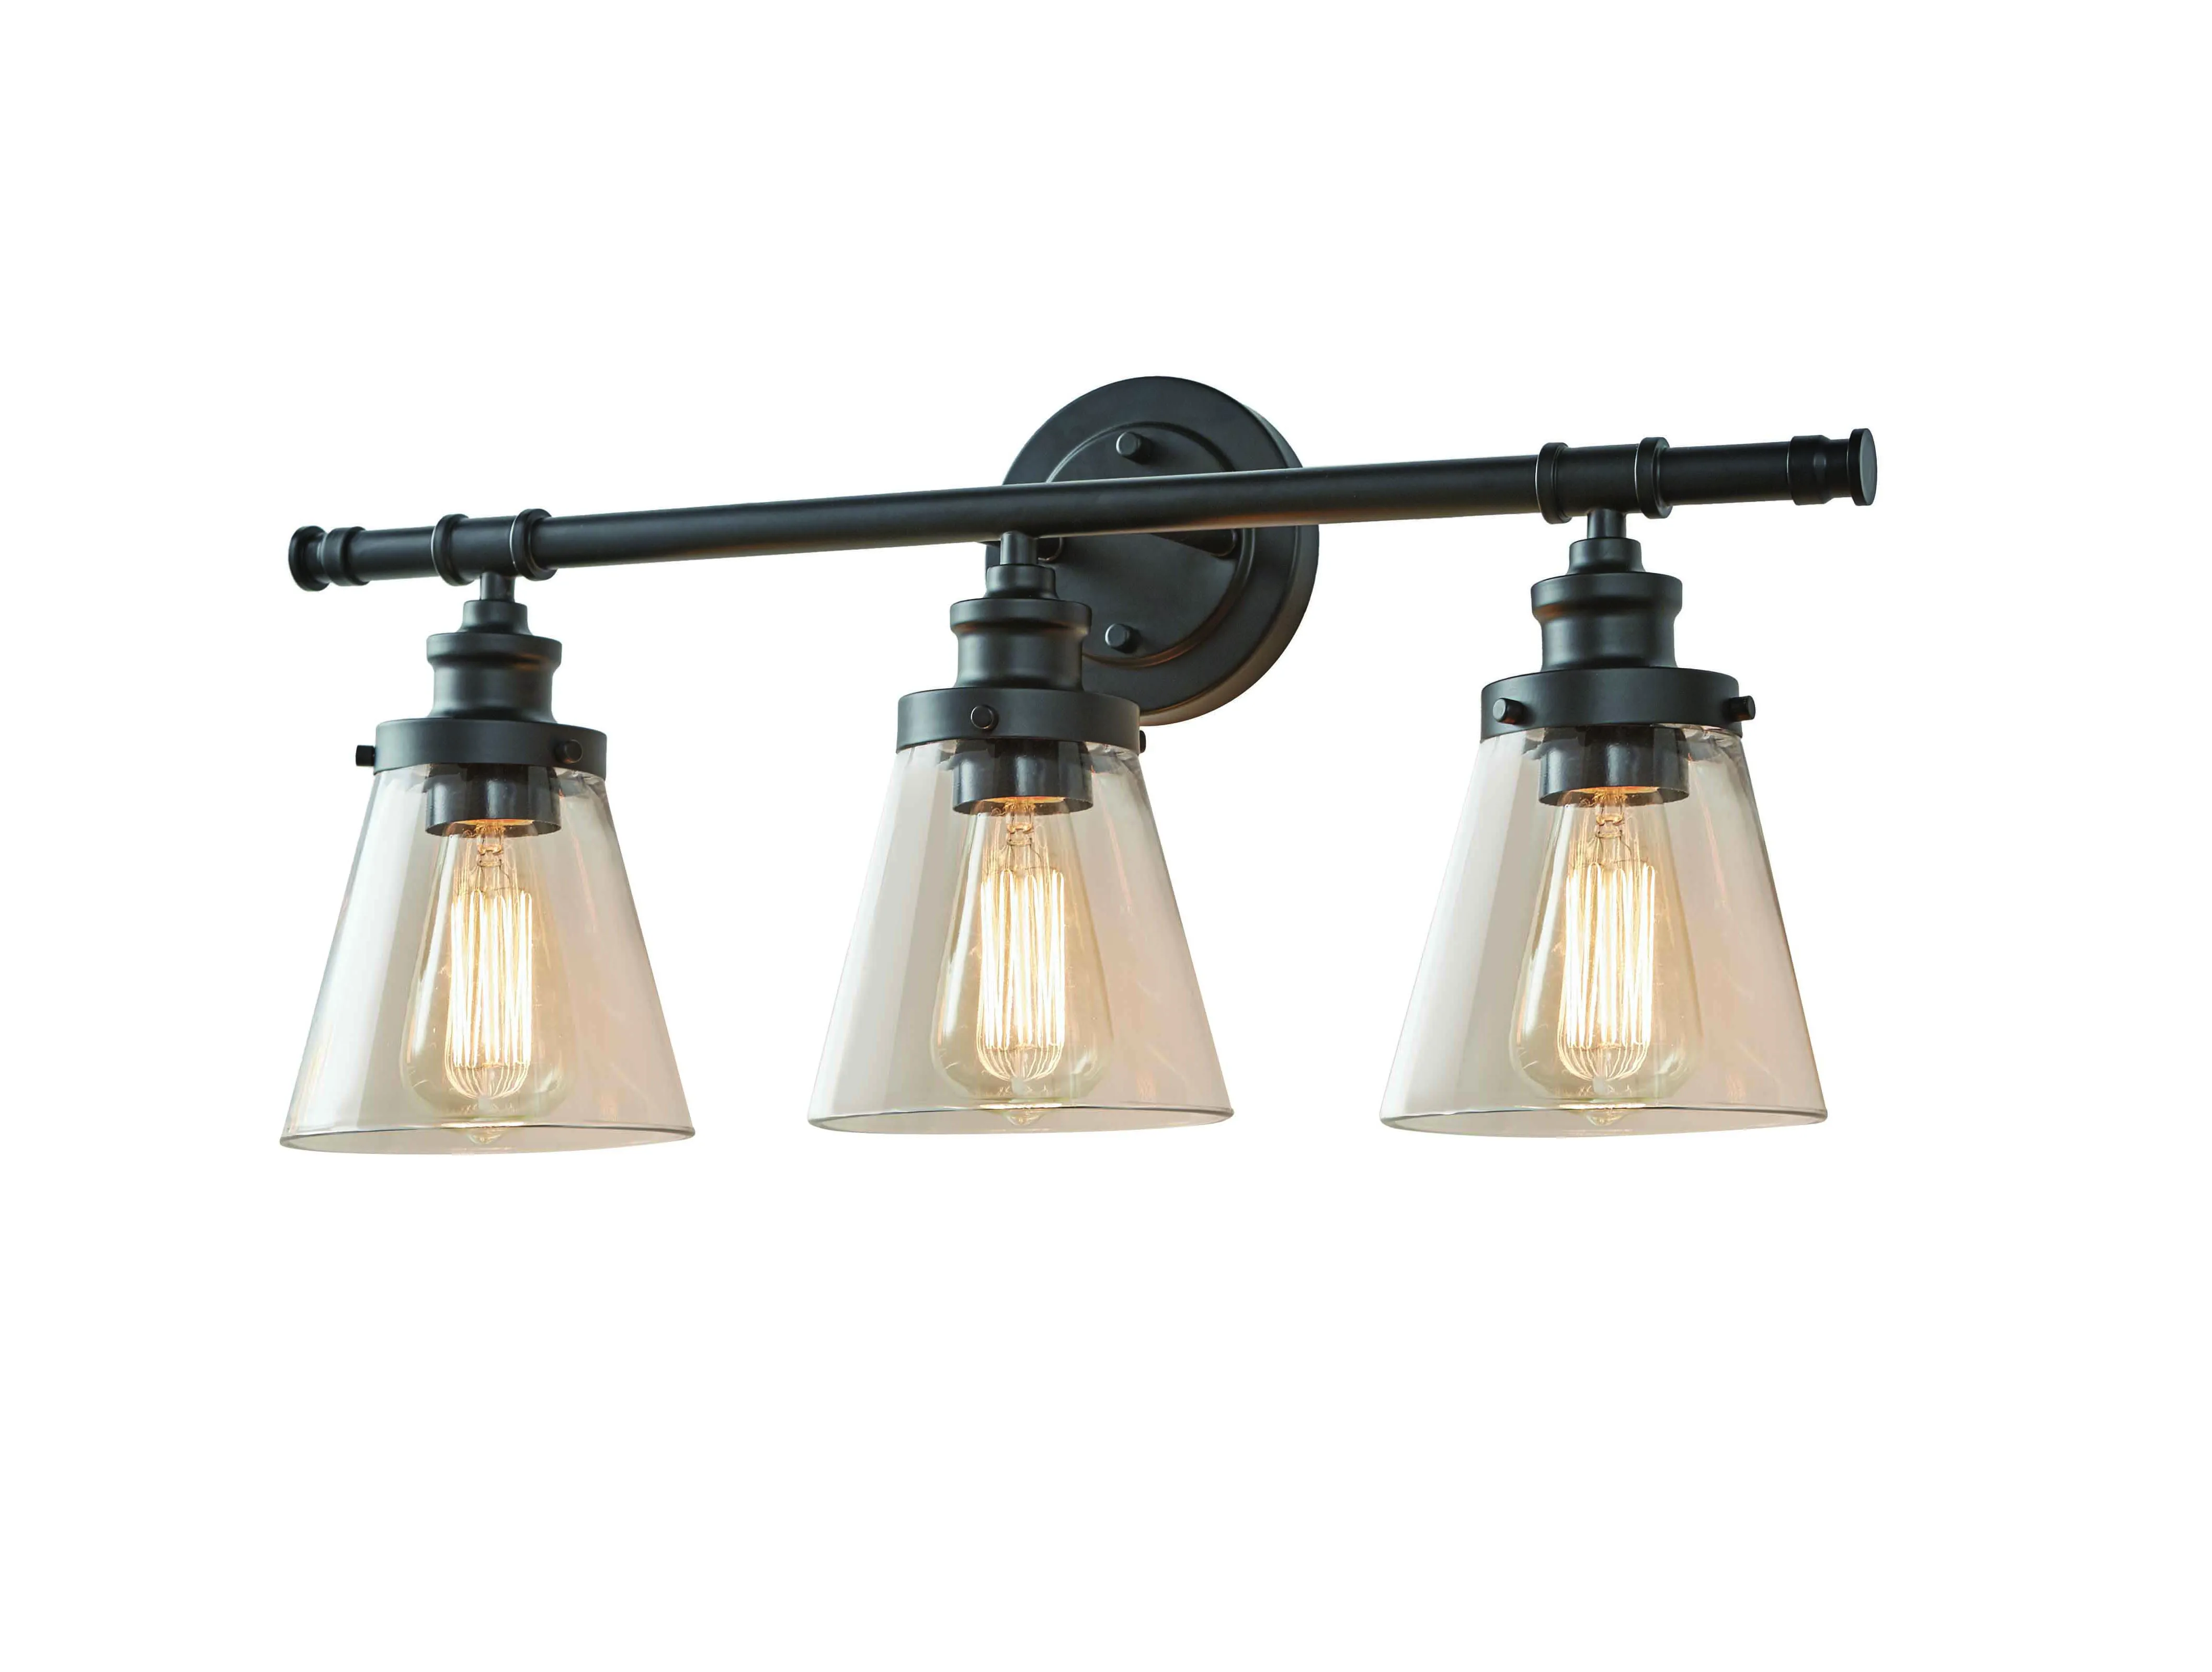 Modern Hotel Wall Lamp Chrone with Opal Glass Shade Loft Industrial Retro Wall Lamp 3 Lights Vanity Fixture